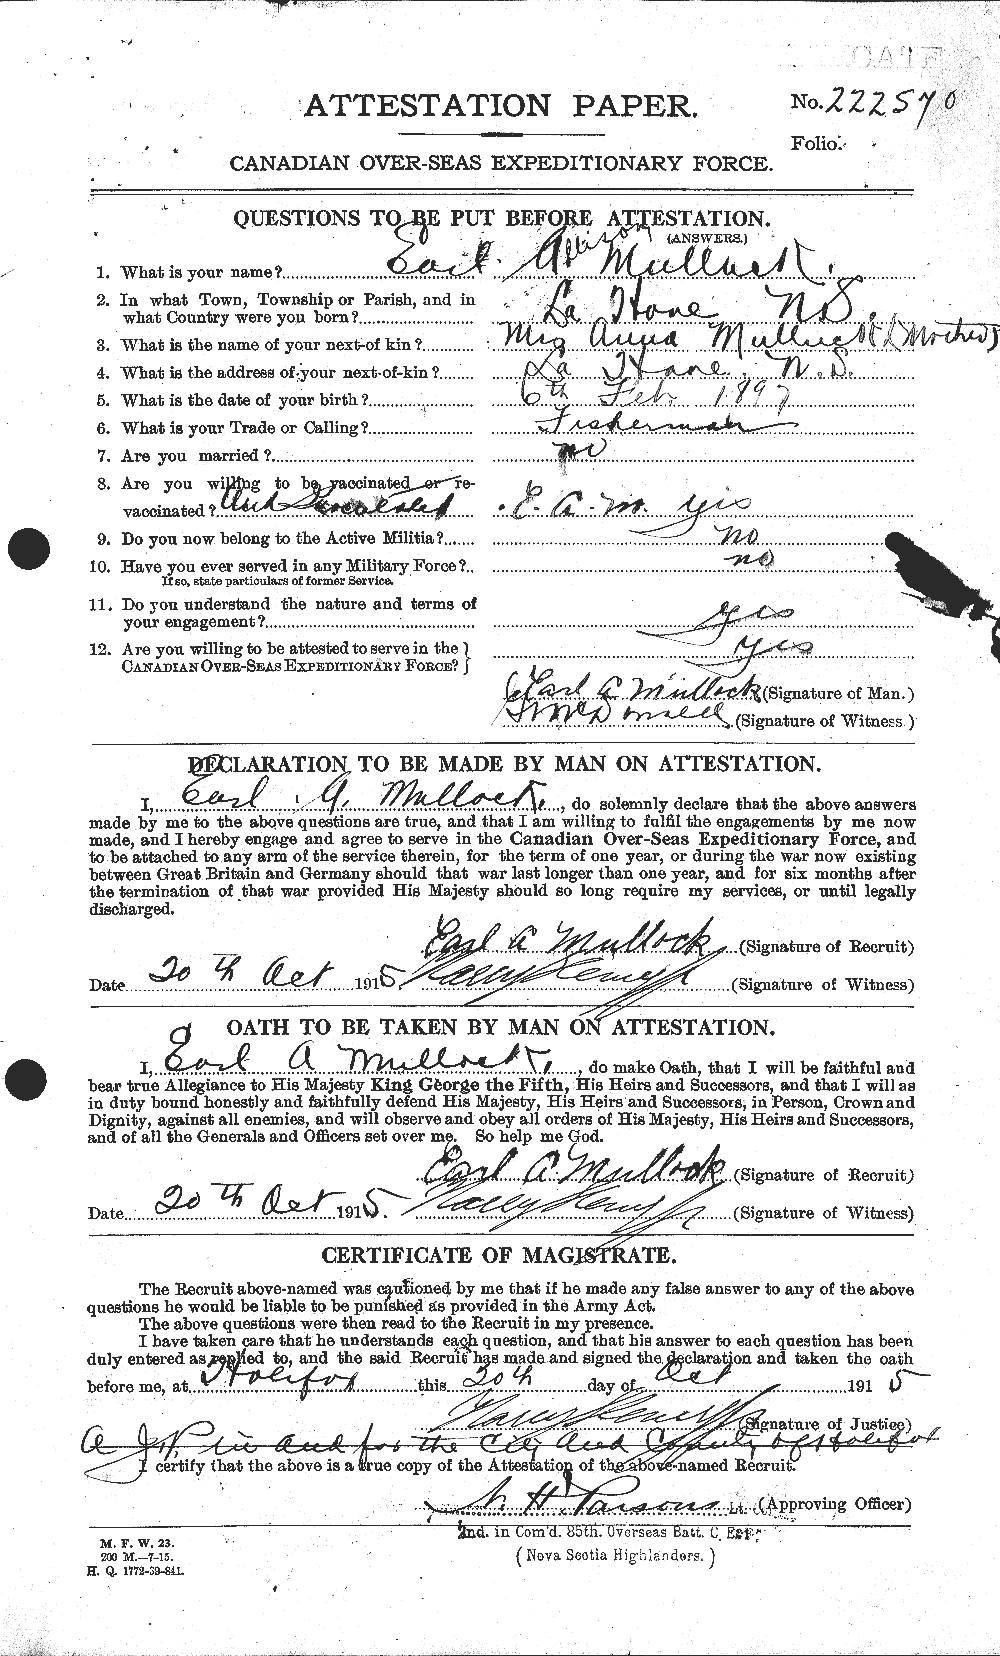 Personnel Records of the First World War - CEF 513544a